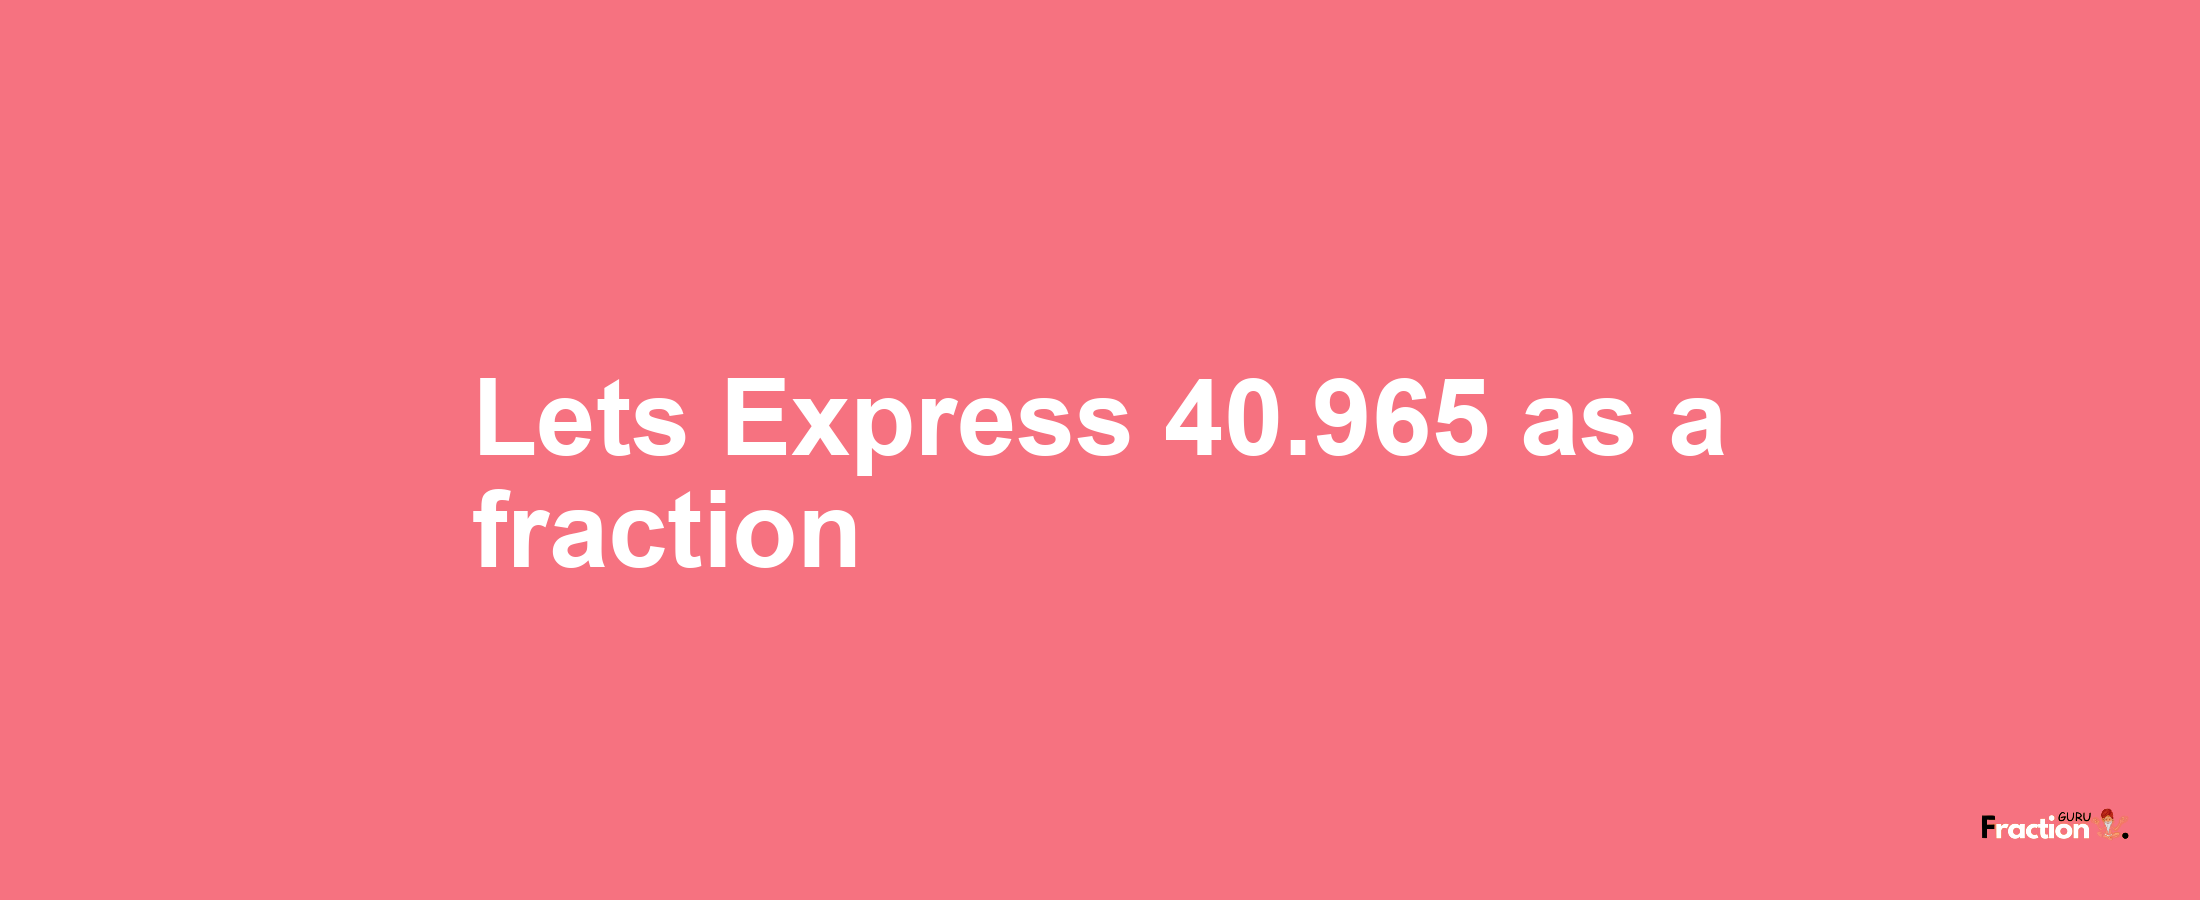 Lets Express 40.965 as afraction